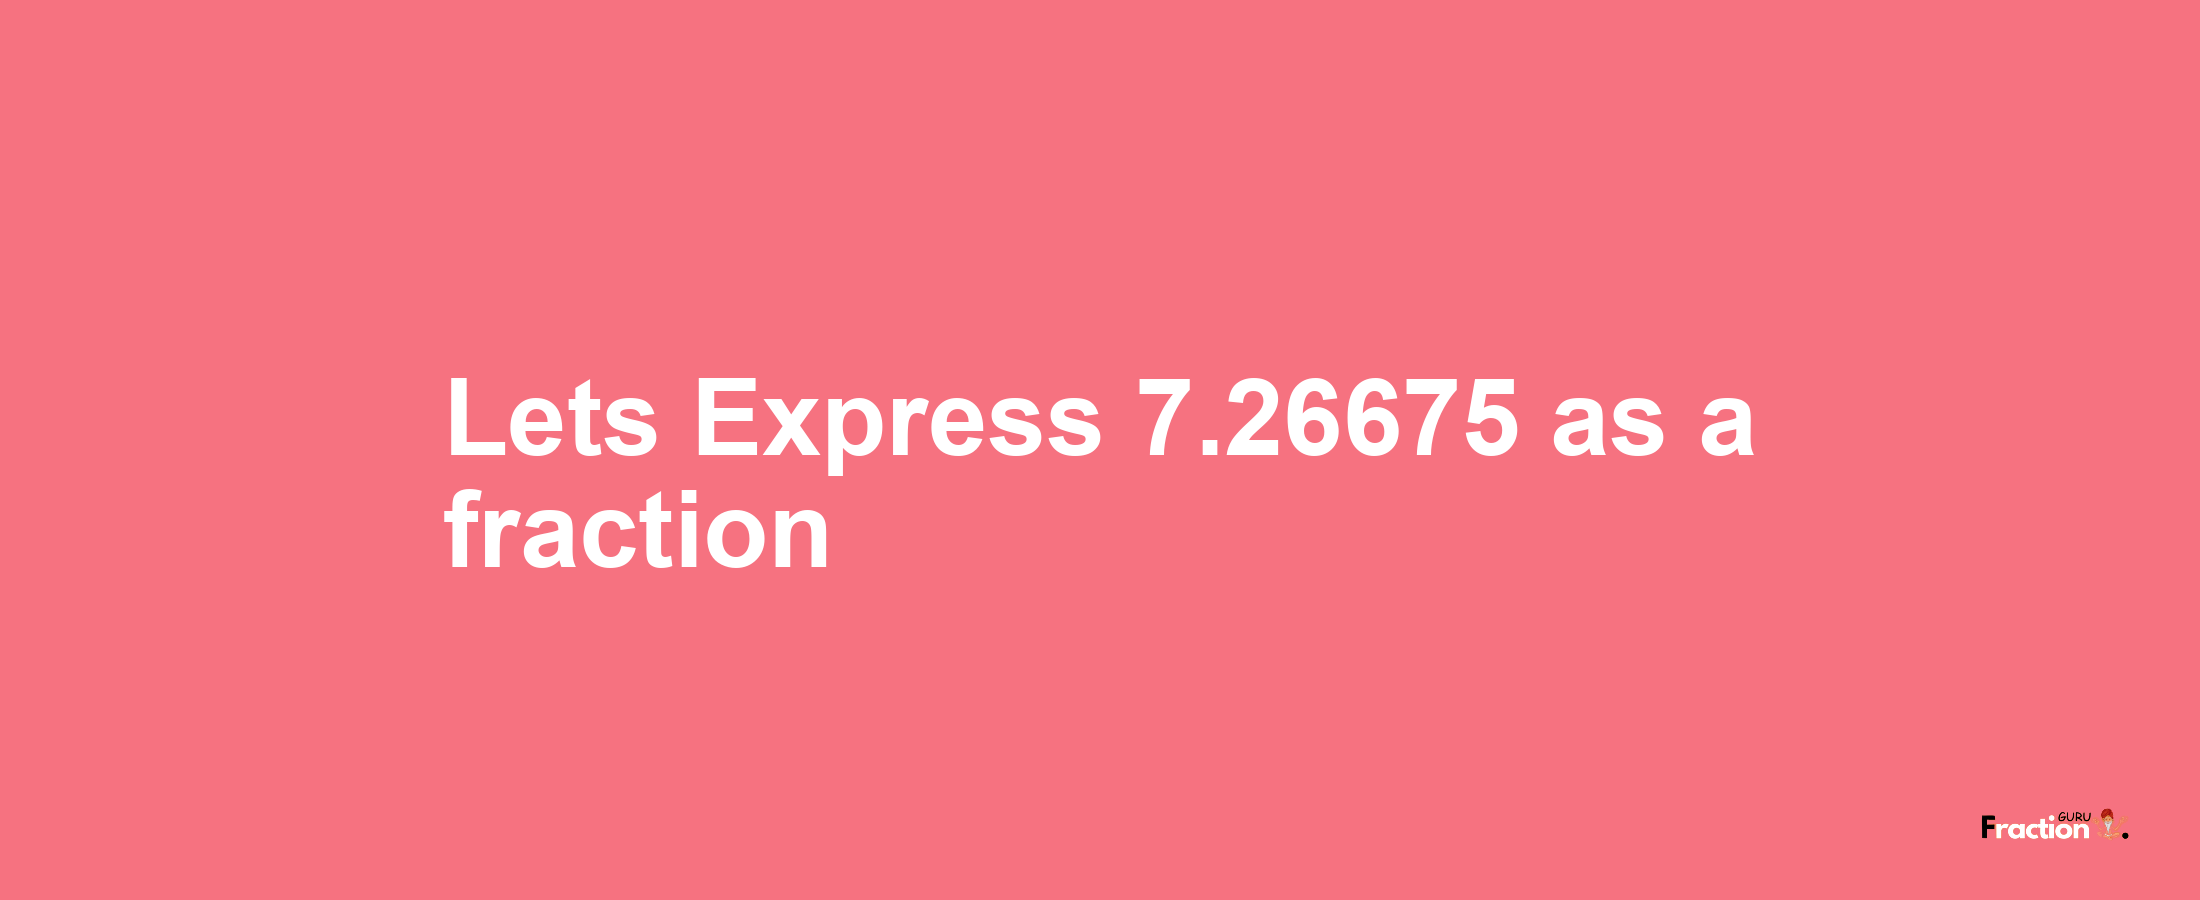 Lets Express 7.26675 as afraction